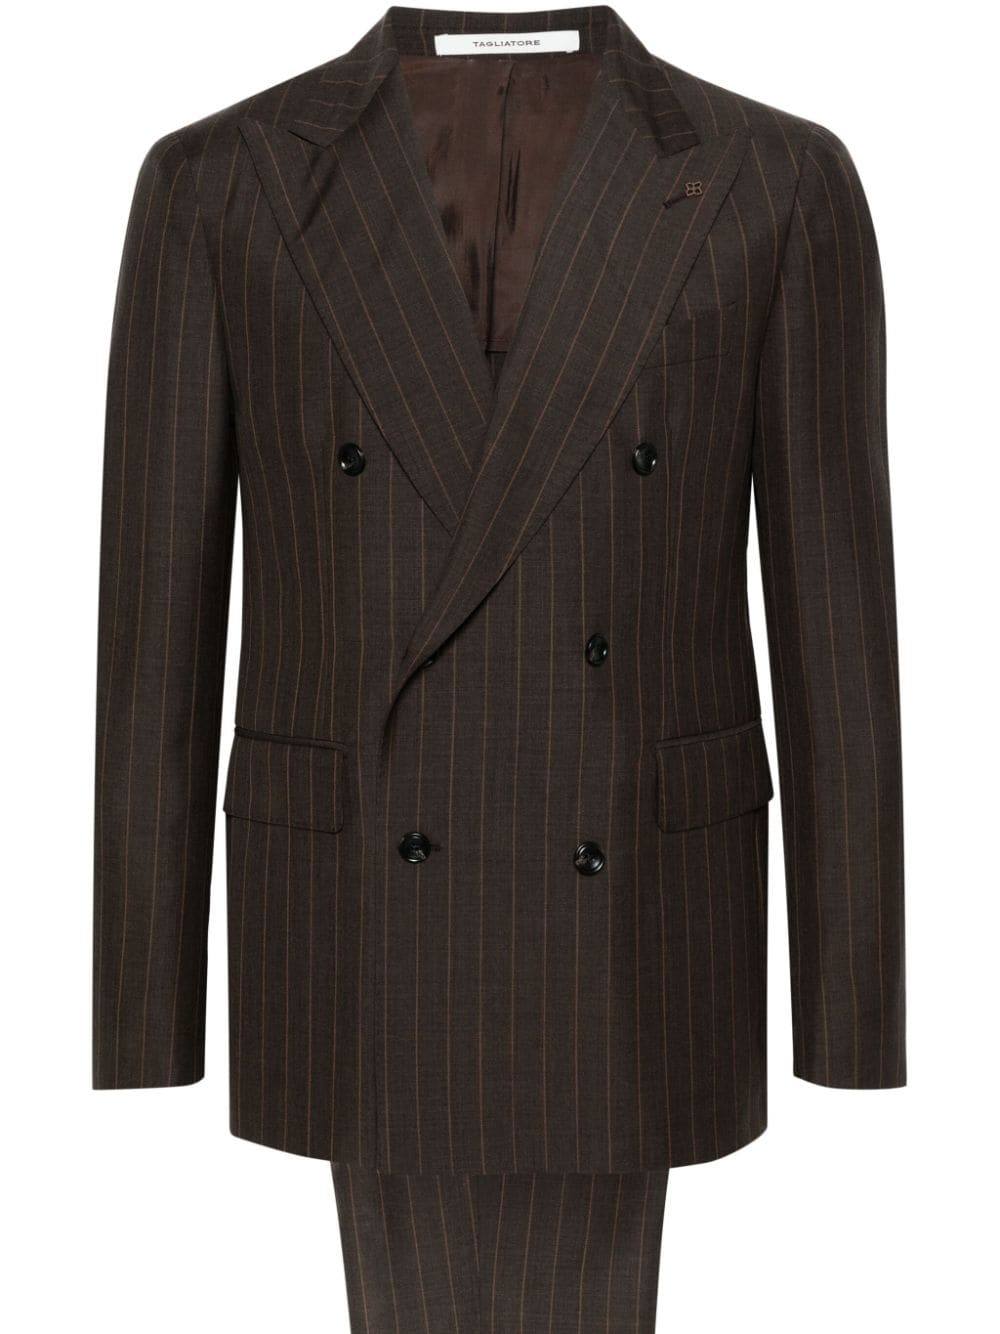 Brown pinstriped suit